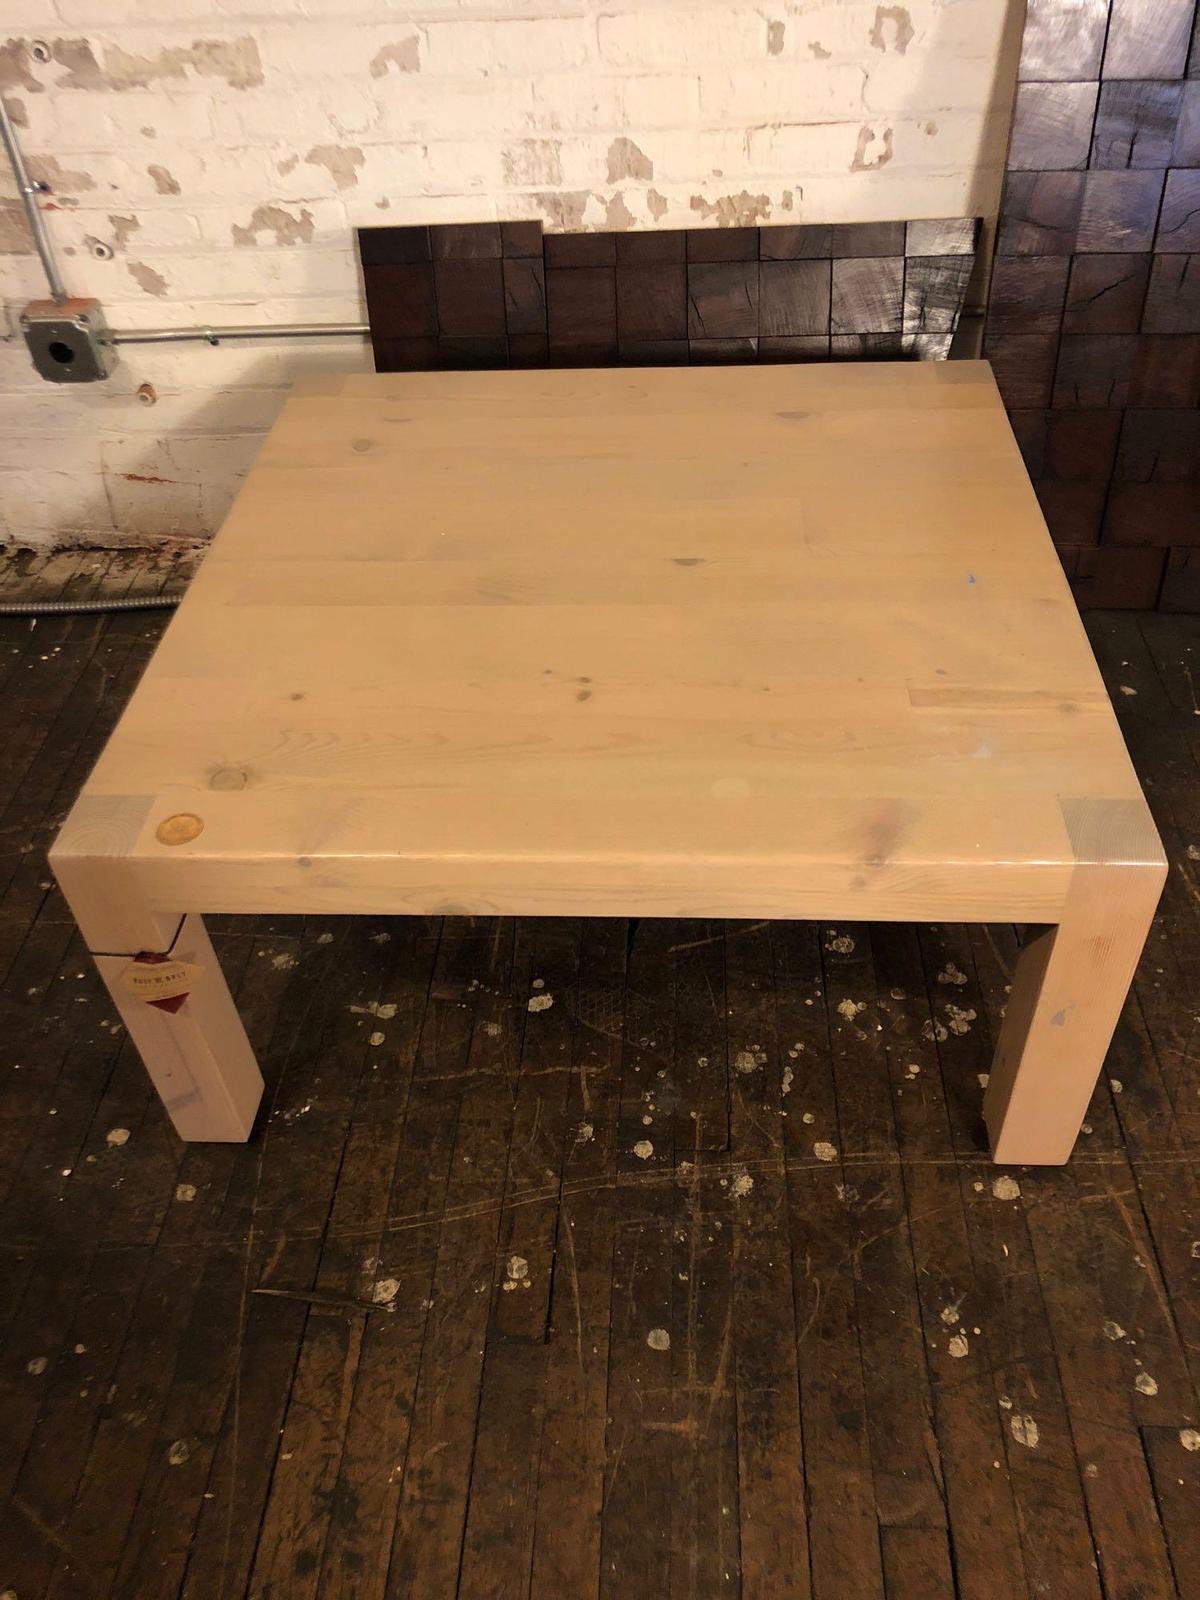 Approx 36 x 36 coffee table.